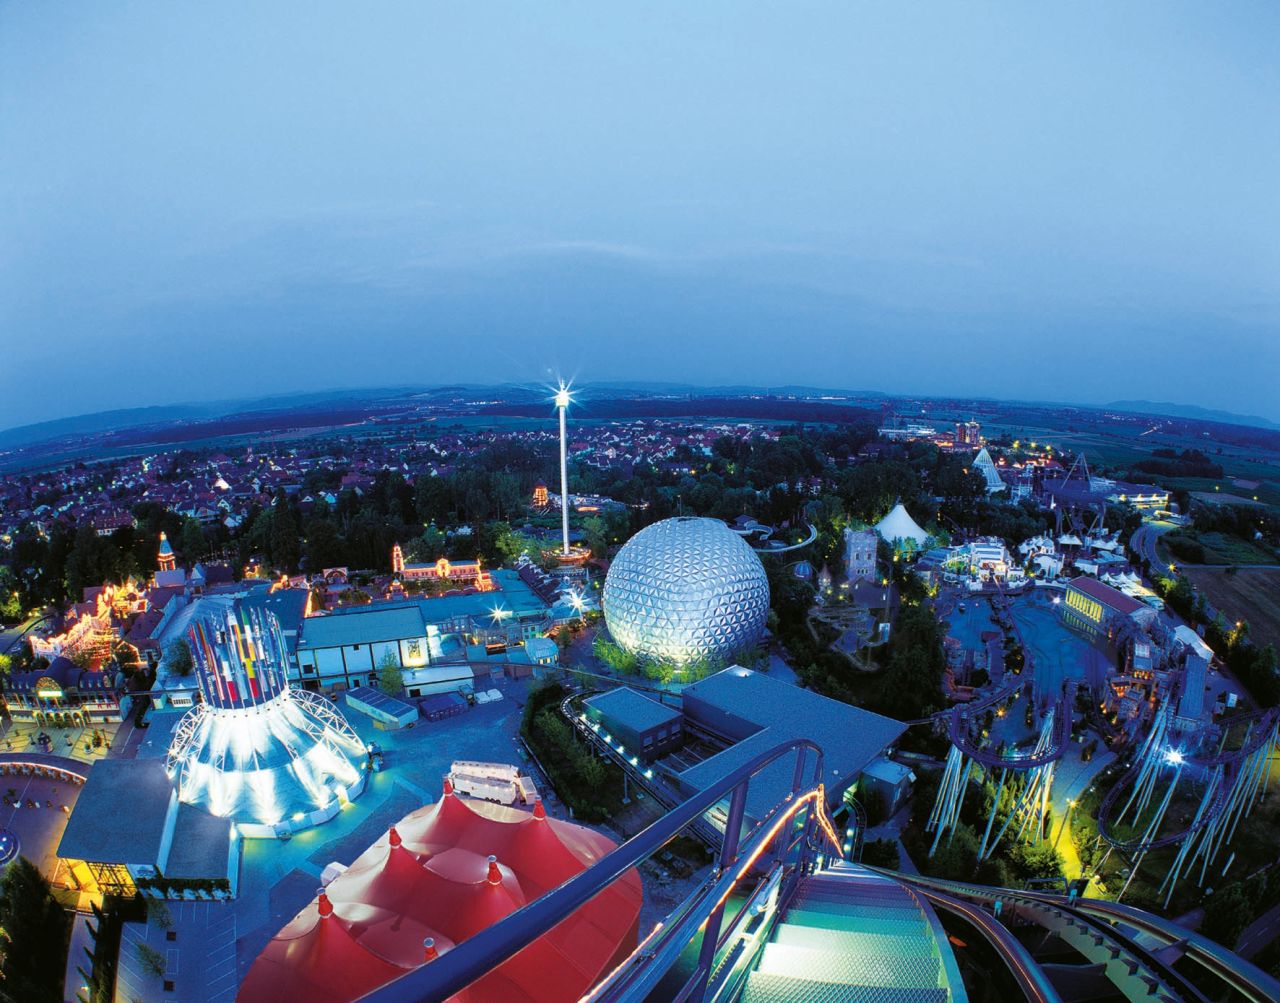 Europa-Park in Rust, Germany, features a restaurant with a one-star Michelin rating. 